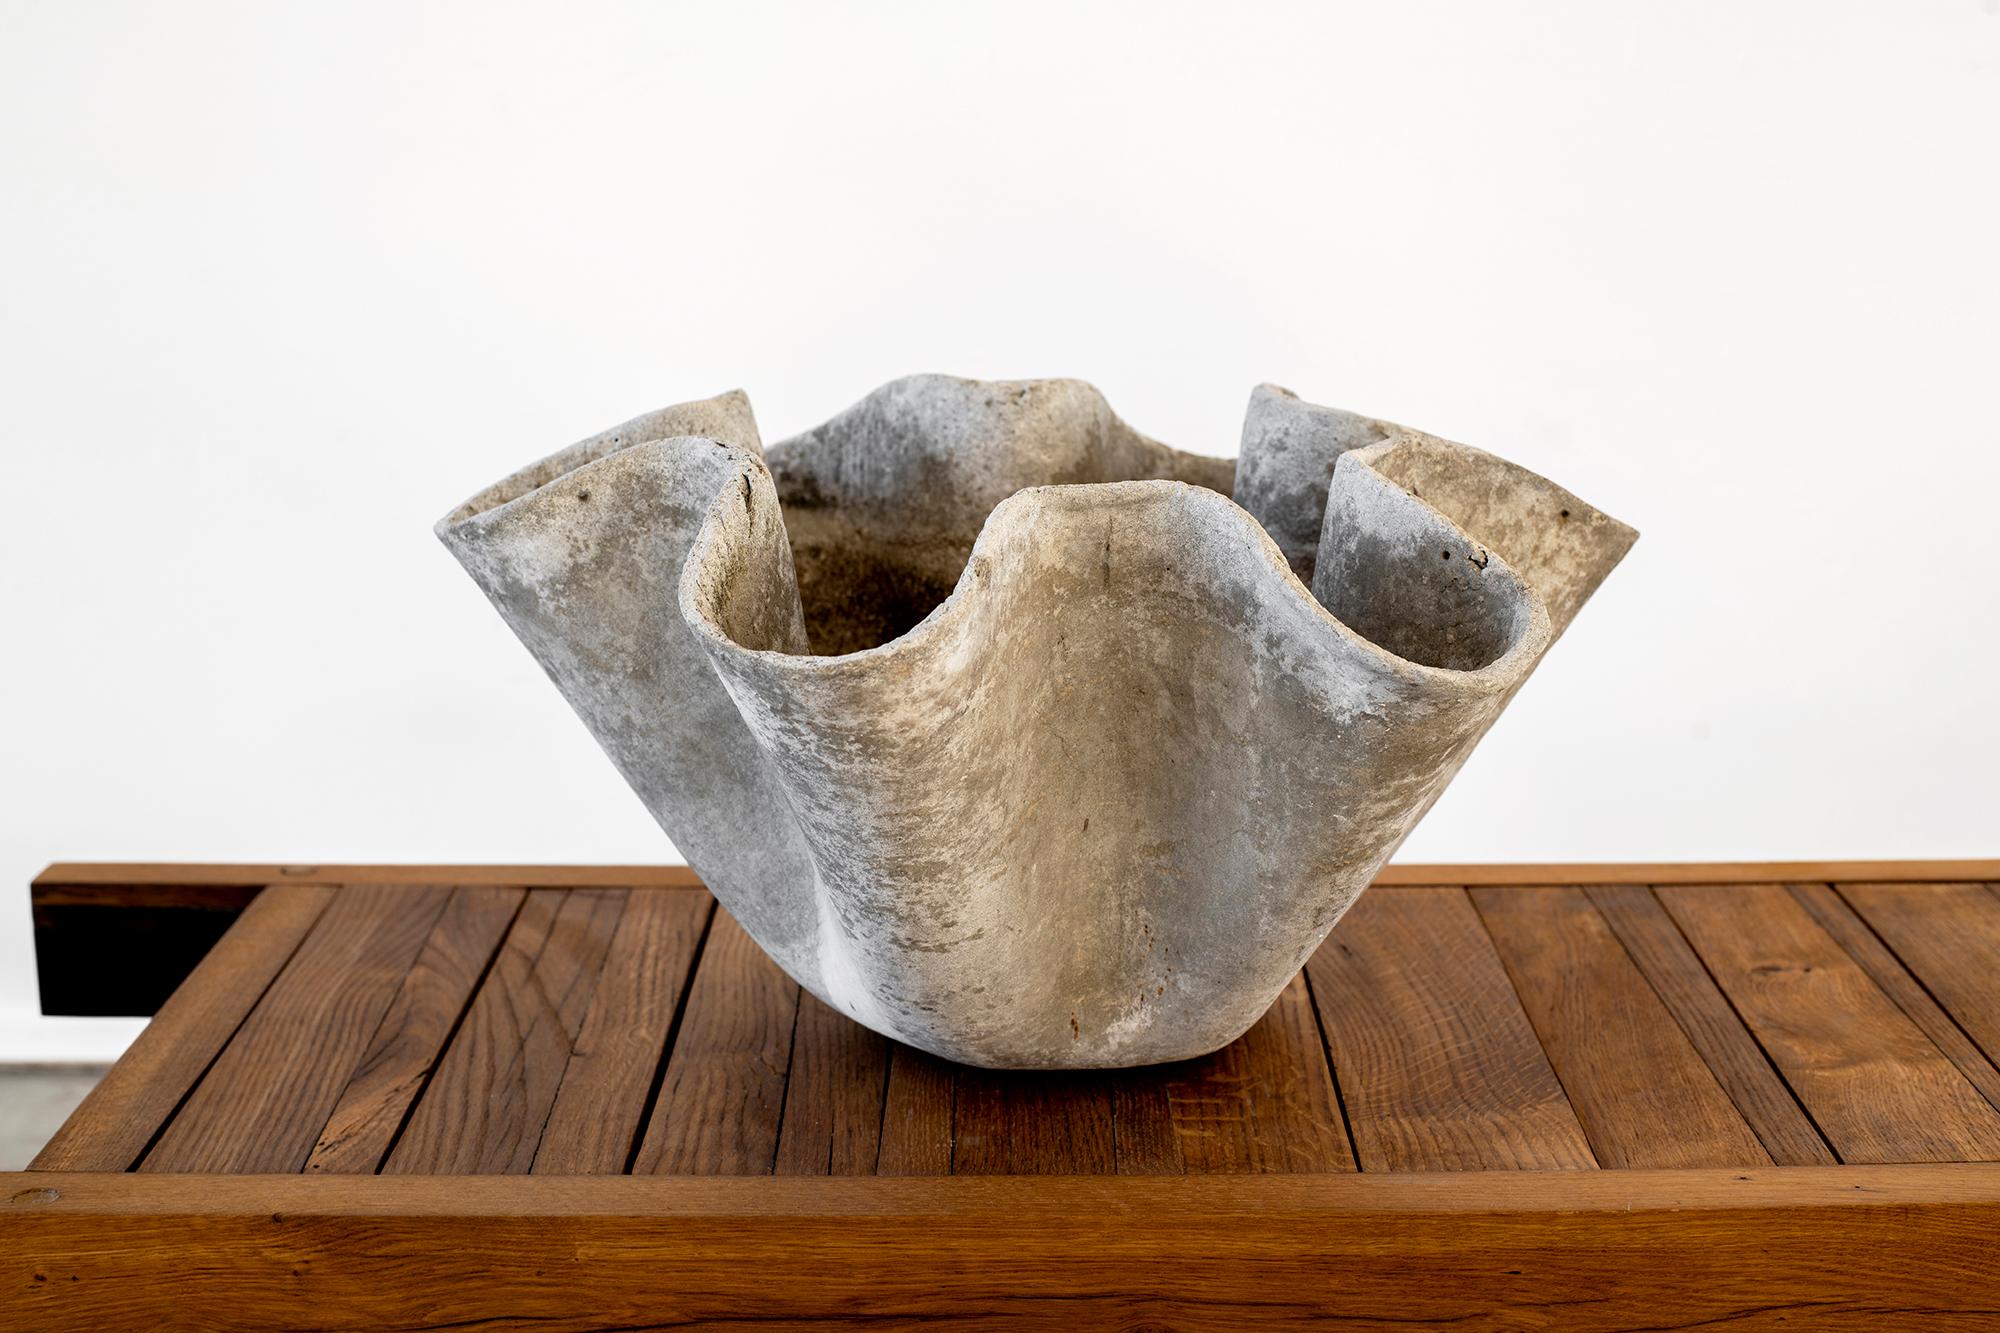 Fantastic biomorphic handkerchief planter by the Swiss Architect, Willy Guhl. 
Wonderful sculptural shape with great age, patina, and coloring.